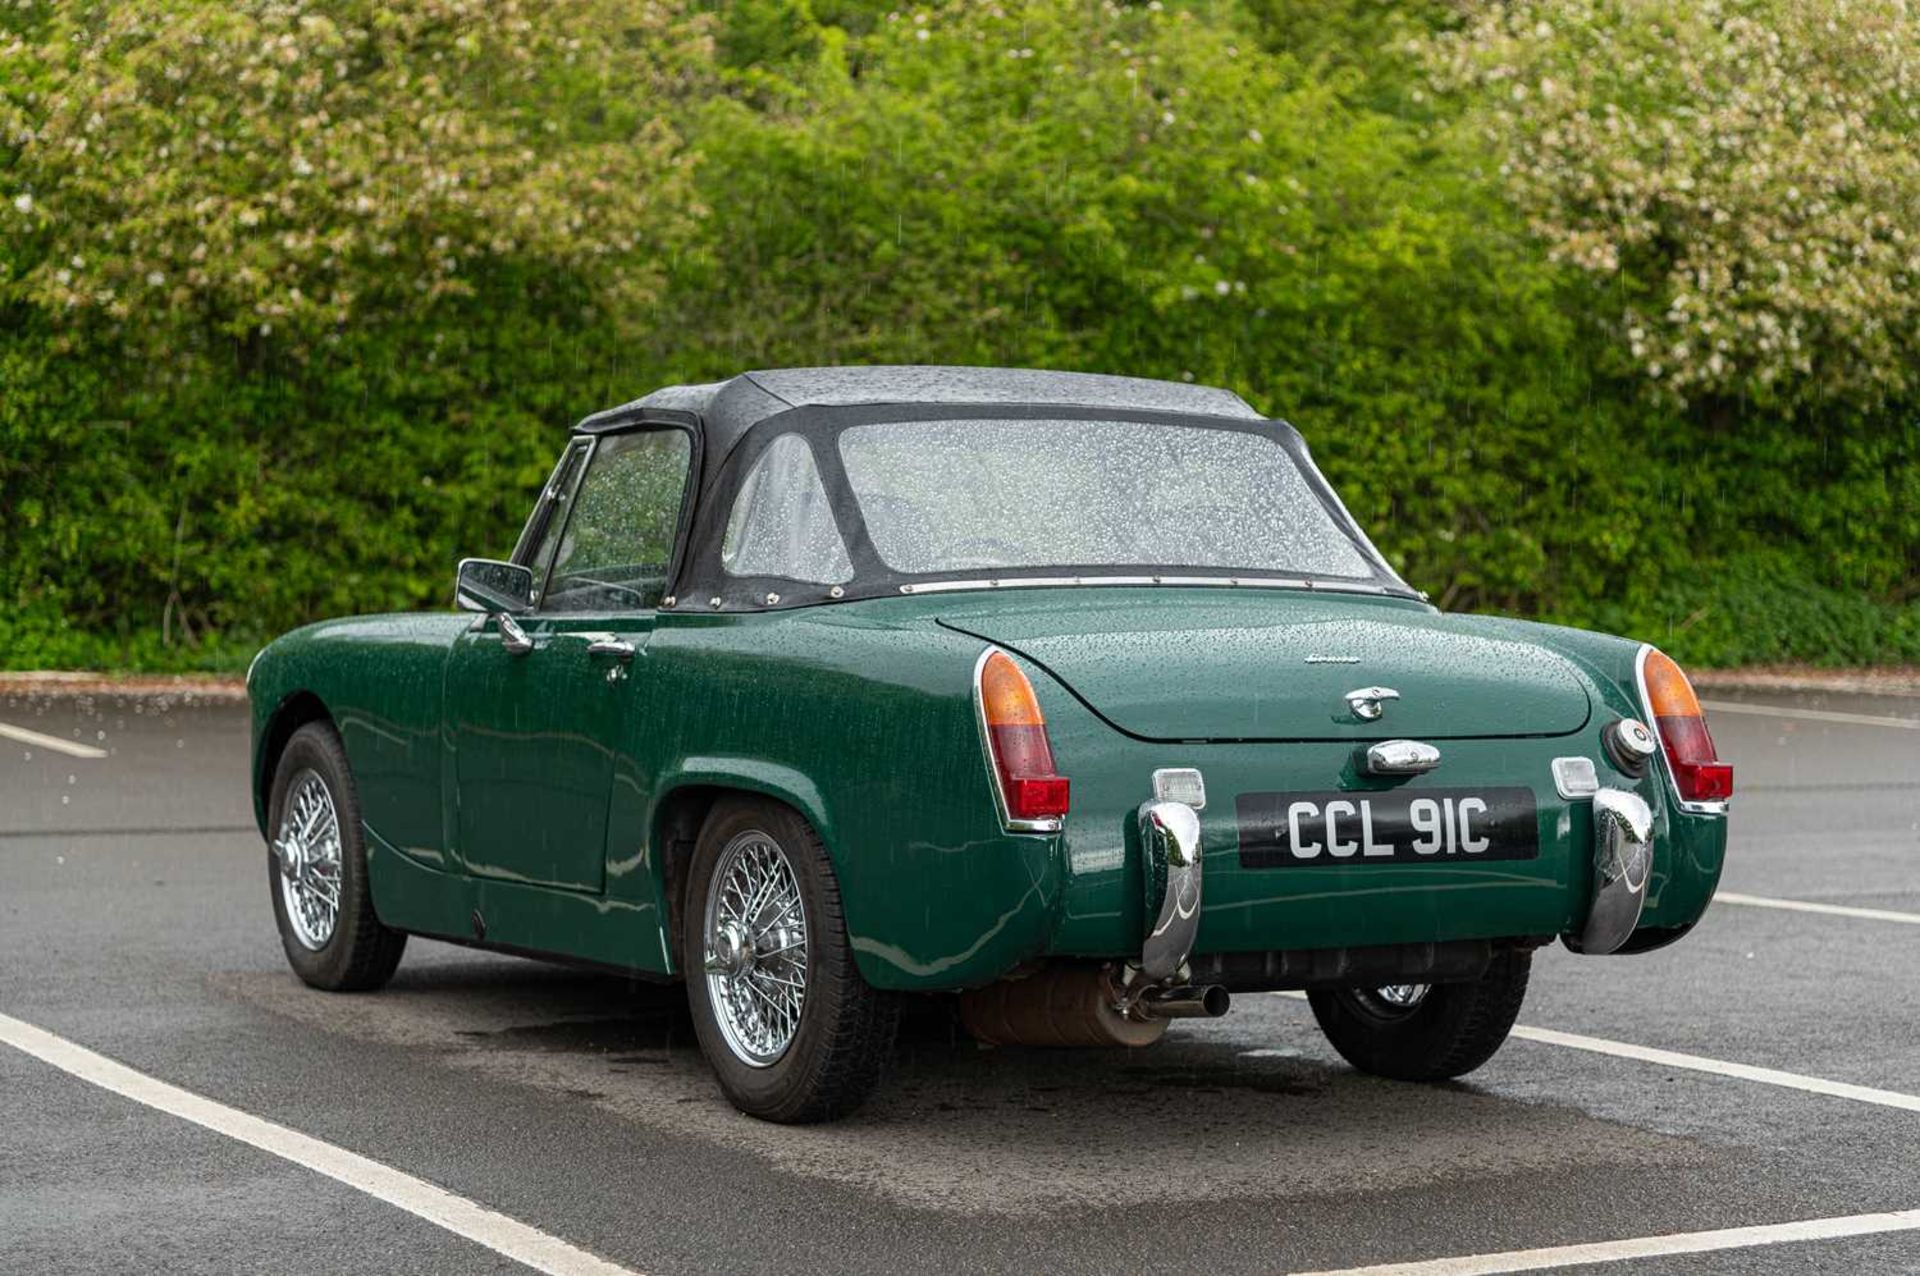 1965 Austin-Healey Sprite Formerly the property of British Formula One racing driver David Piper - Image 17 of 71